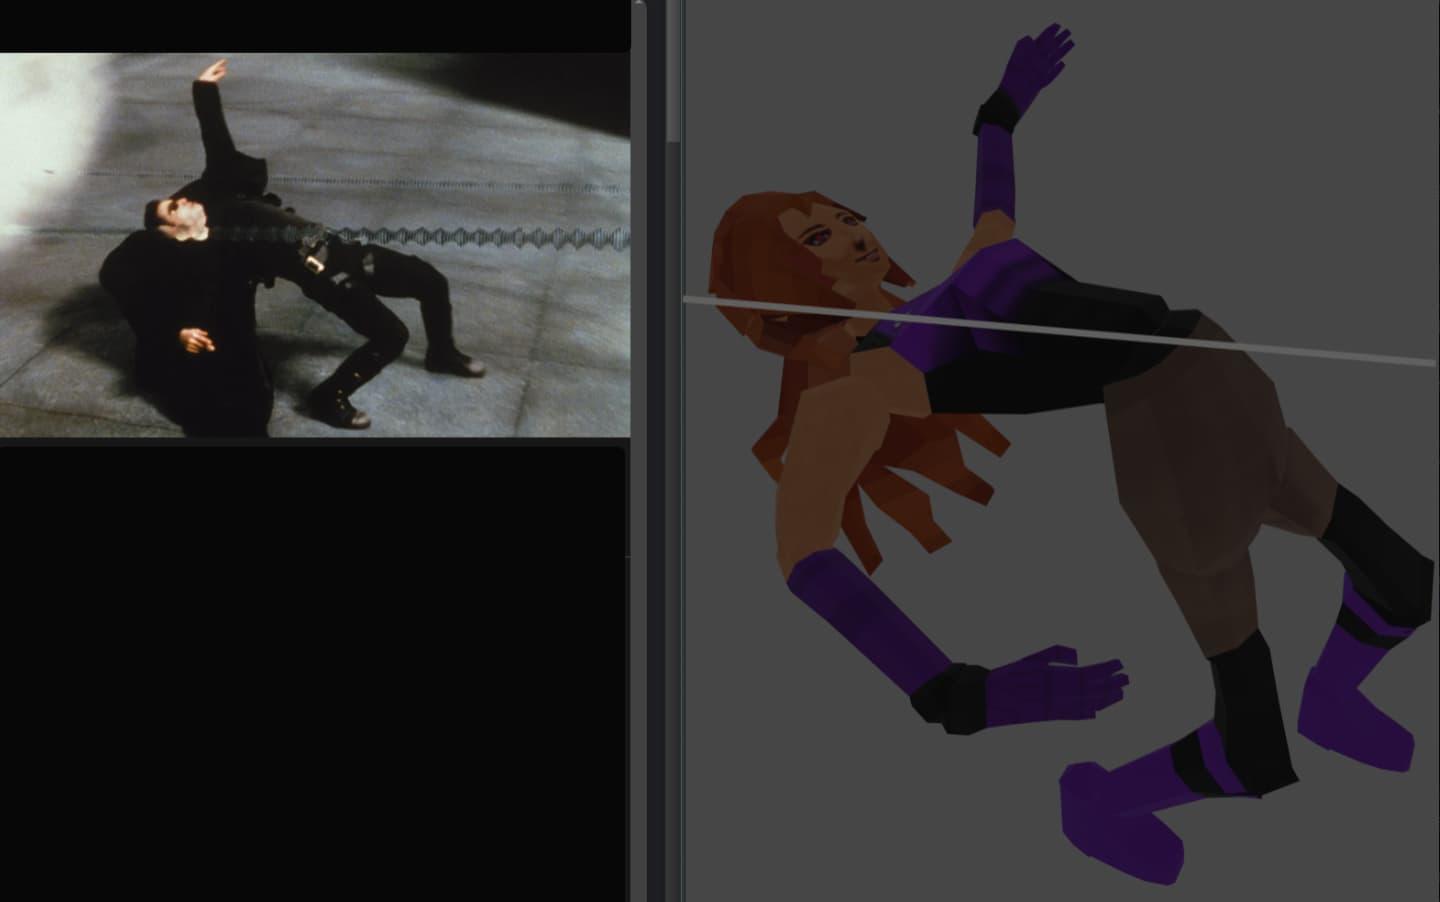 A low-poly female character, animated in the Resident Evil style, is dramatically posed dodging a bullet in midair, similar to Neo from the Matrix